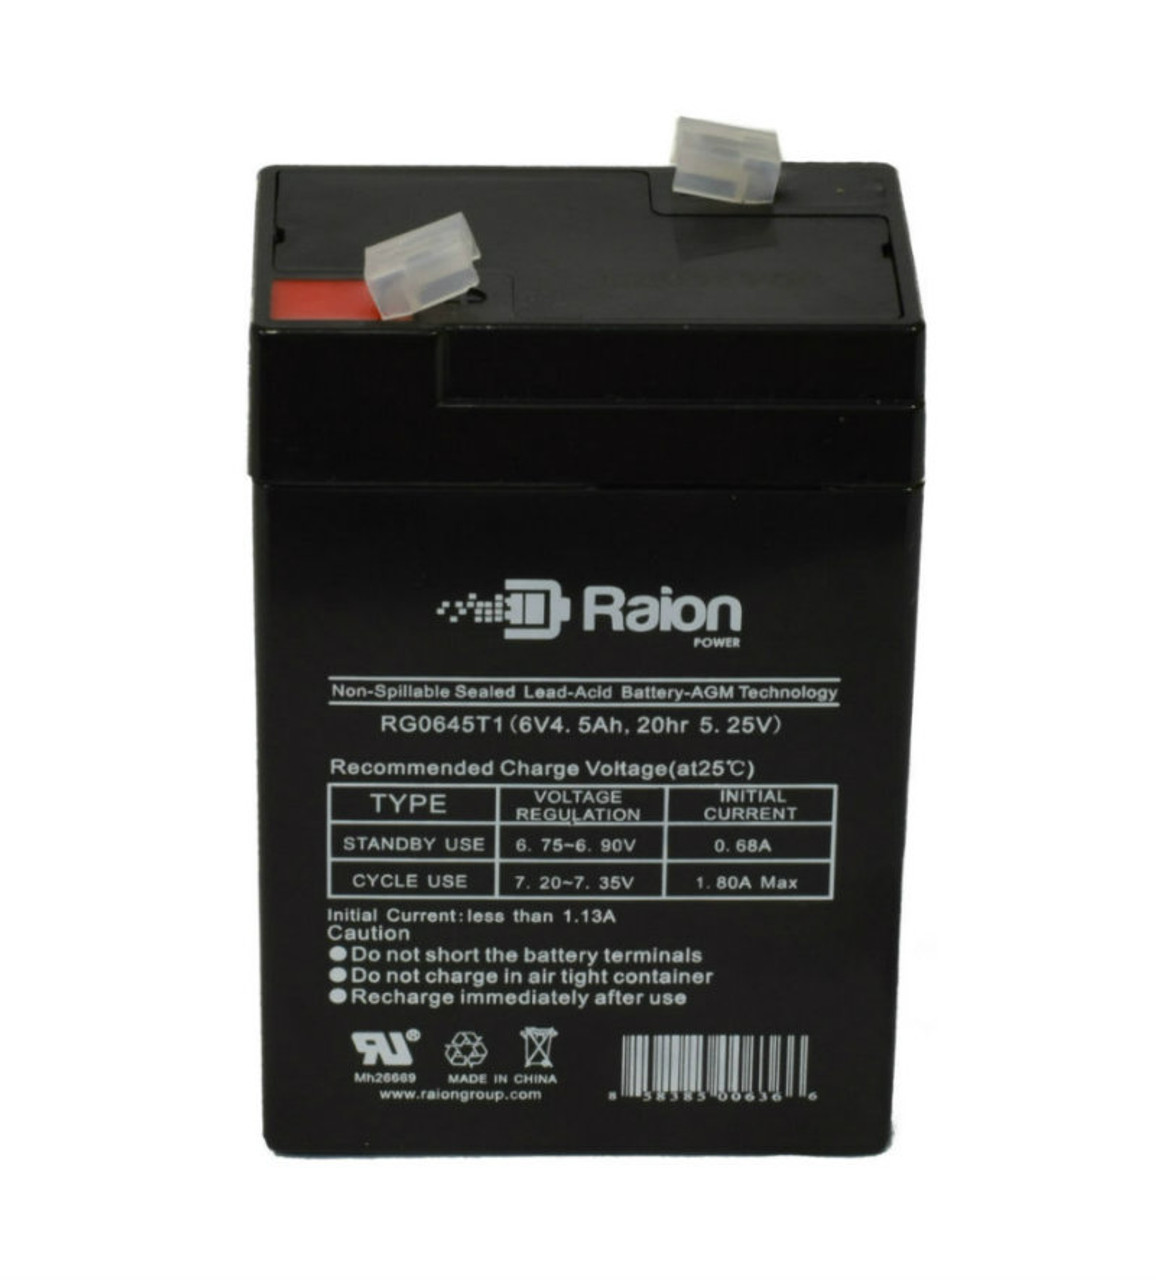 Raion Power RG0645T1 Replacement Battery Cartridge for GS Portalac PE6V4